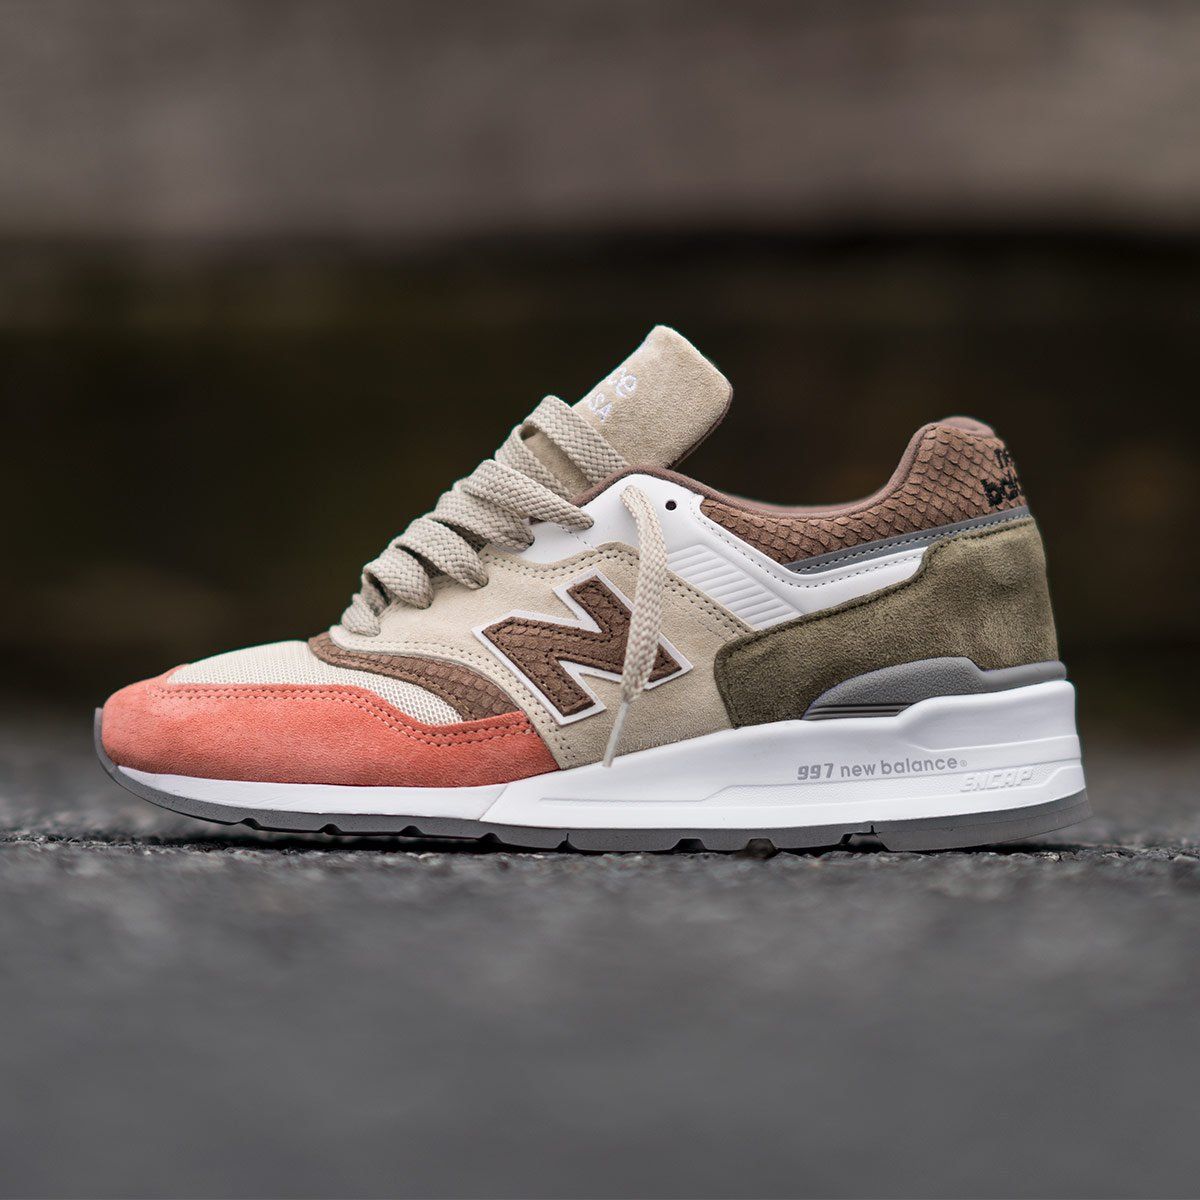 Now Available: New Balance 997 